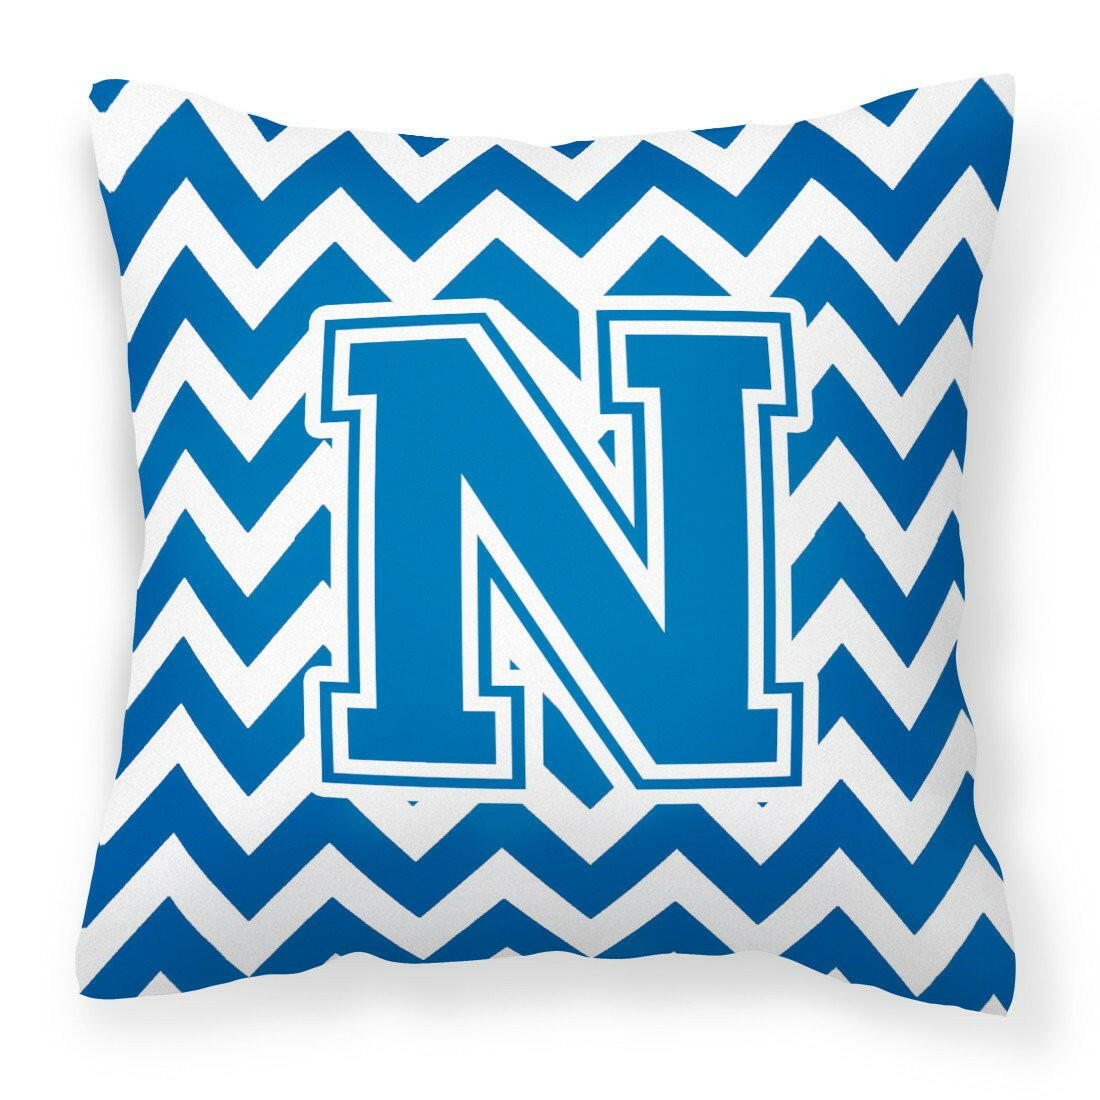 Letter N Chevron Blue and White Fabric Decorative Pillow CJ1056-NPW1414 by Caroline's Treasures